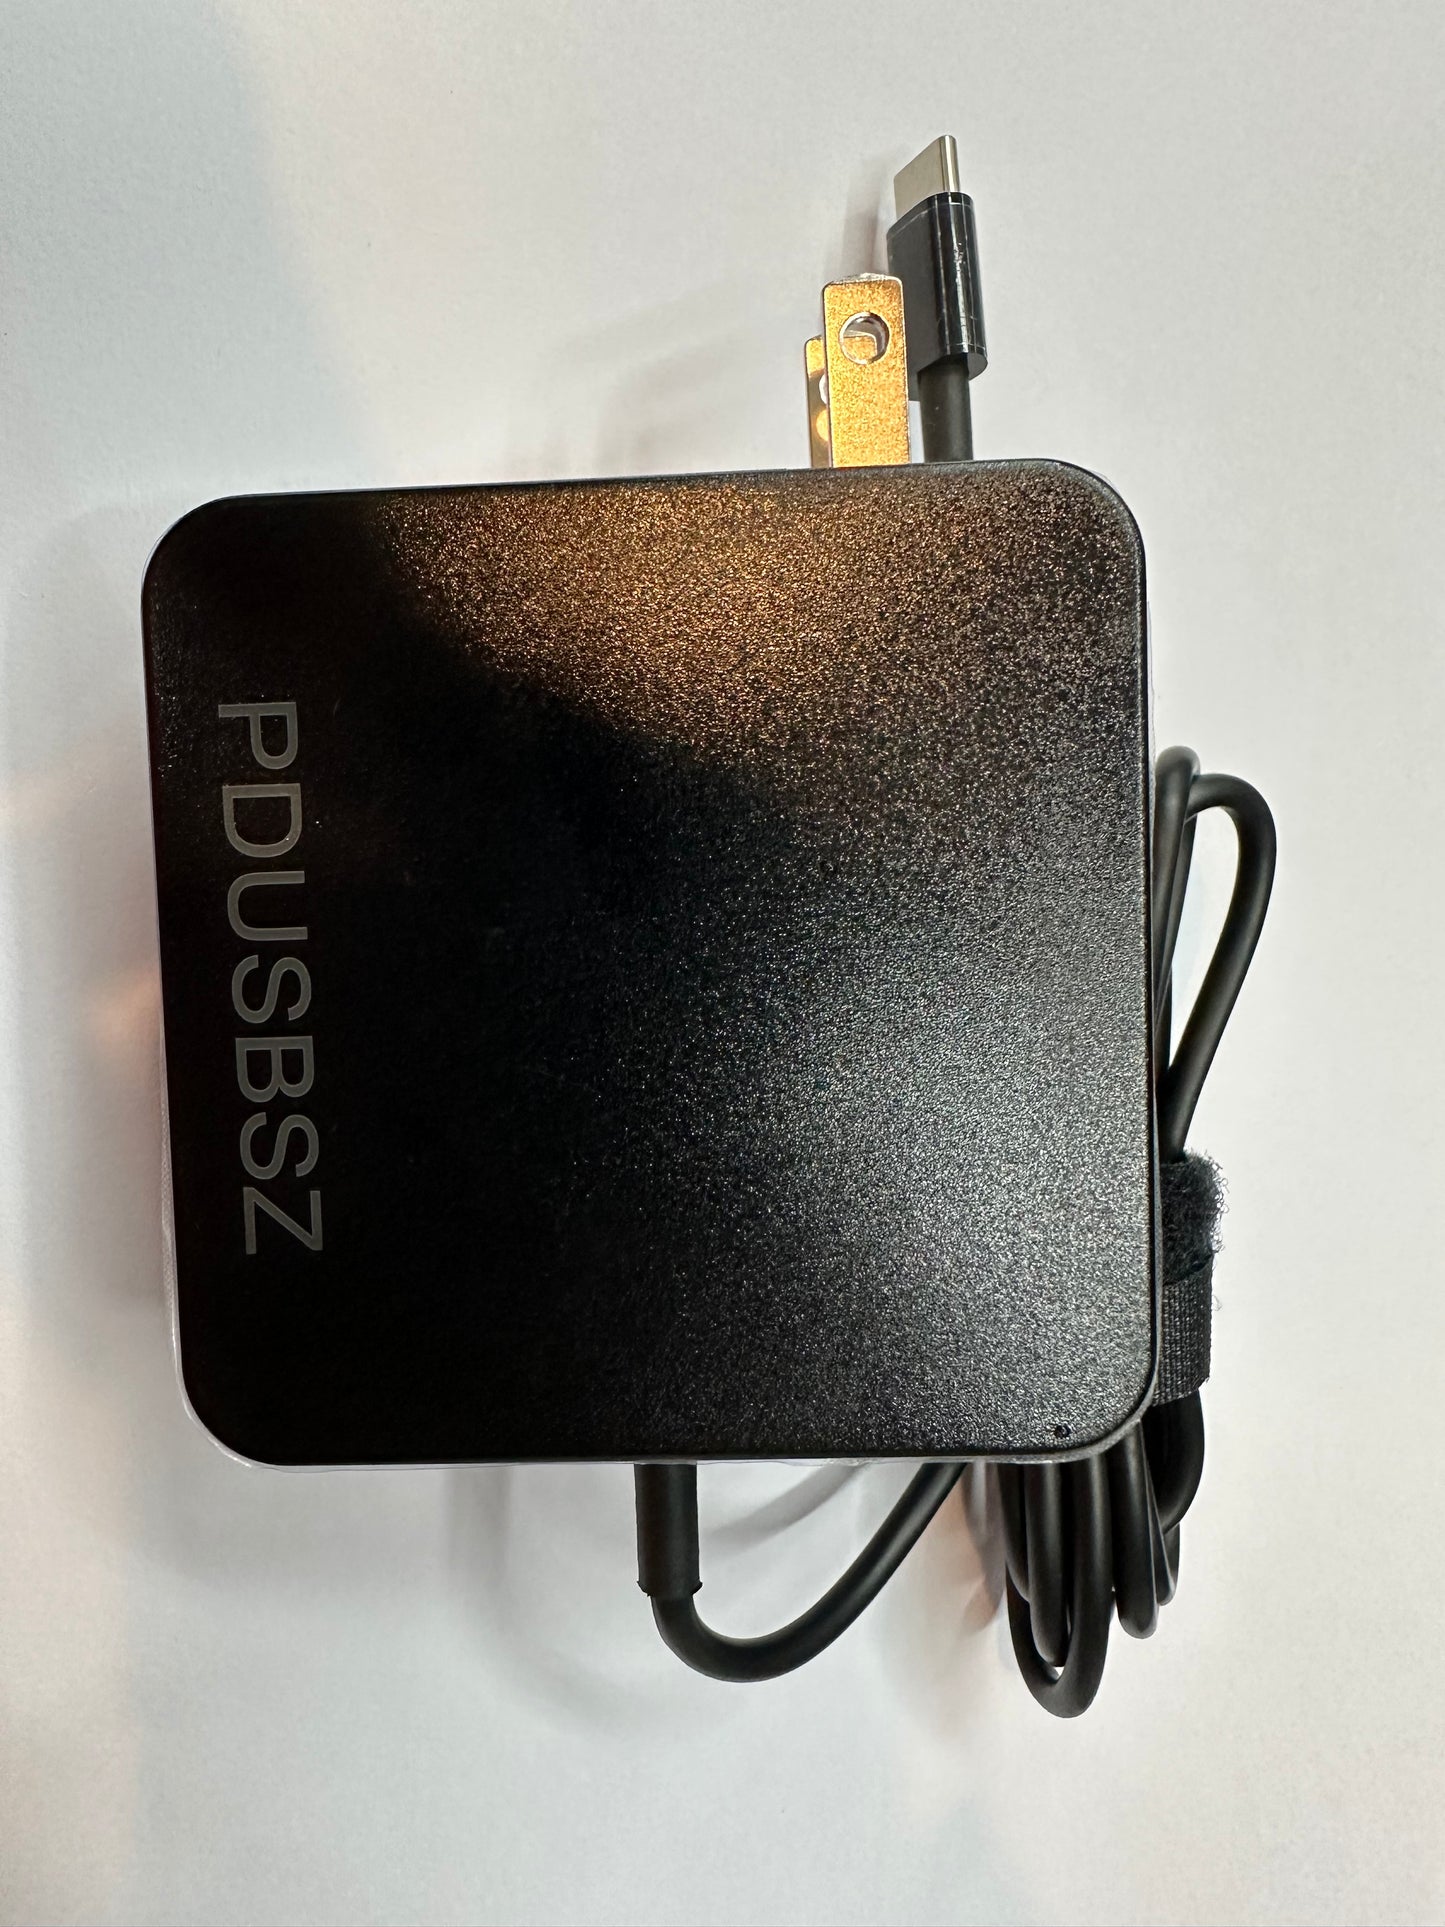 PDUSBSZ 65W USB C Power Adapter, Type C Power PD Wall Fast Charger